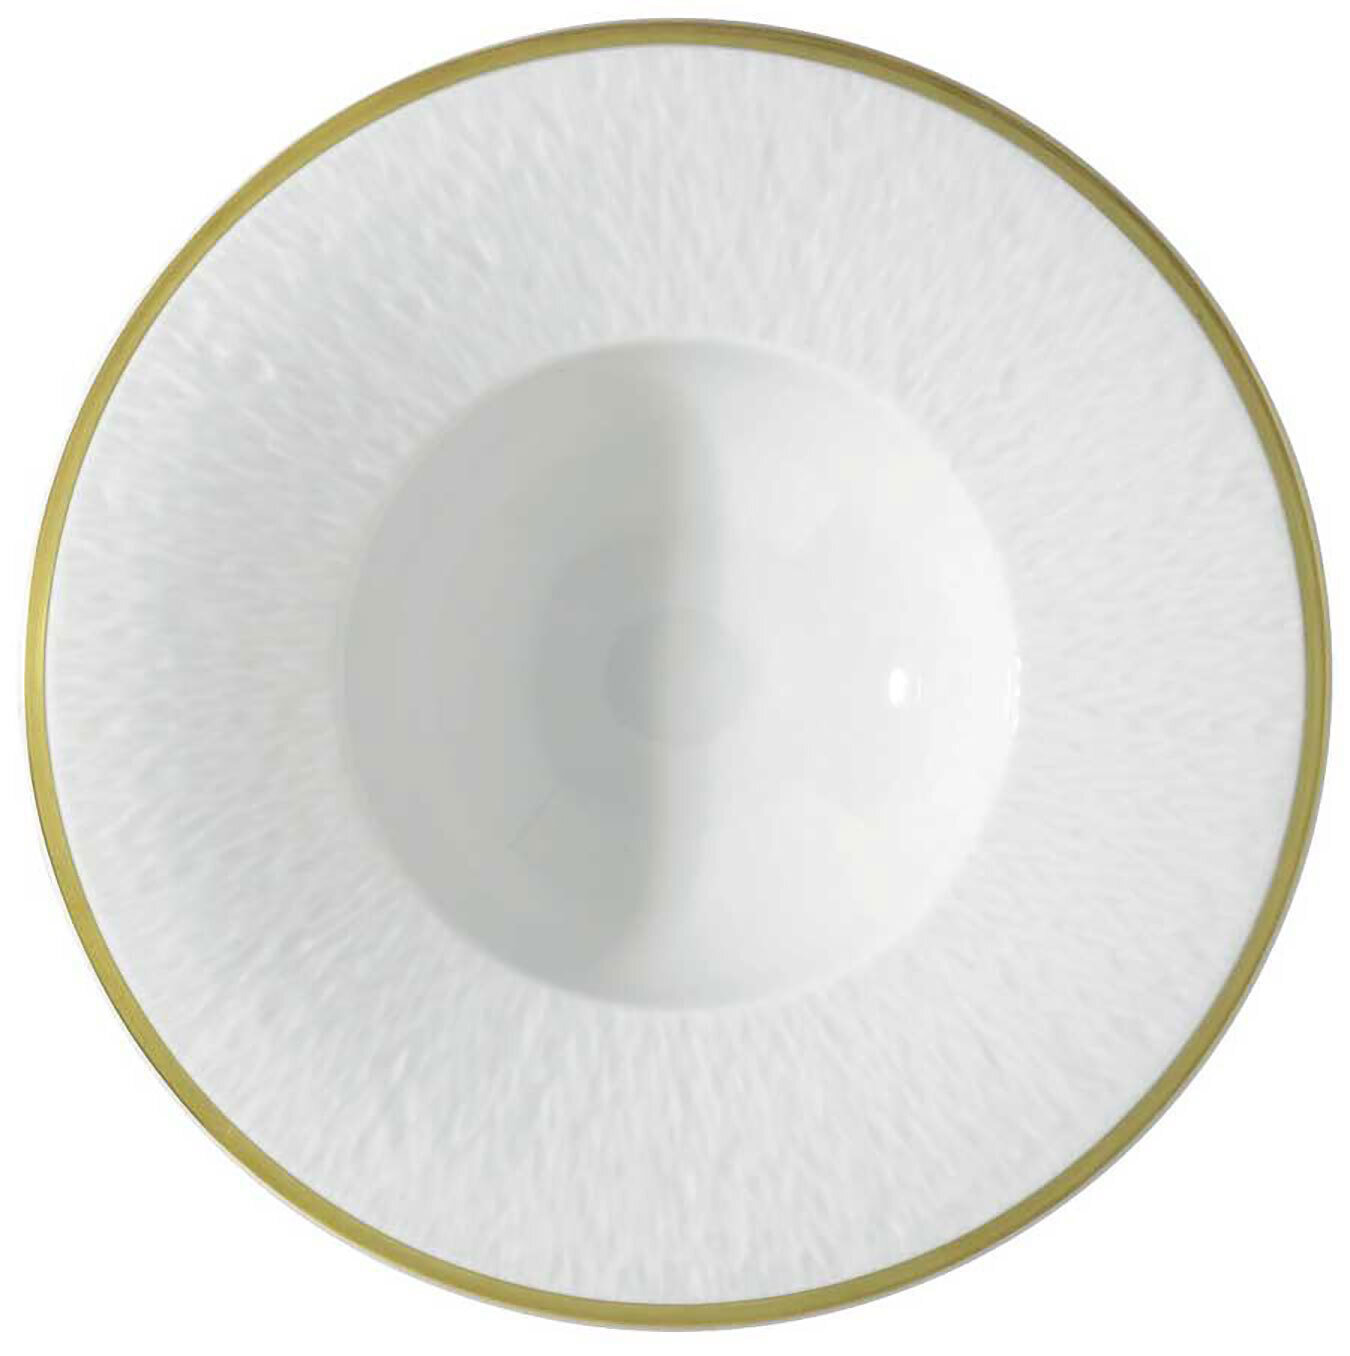 Raynaud Mineral Filet Gold Or Rim Soup Plate